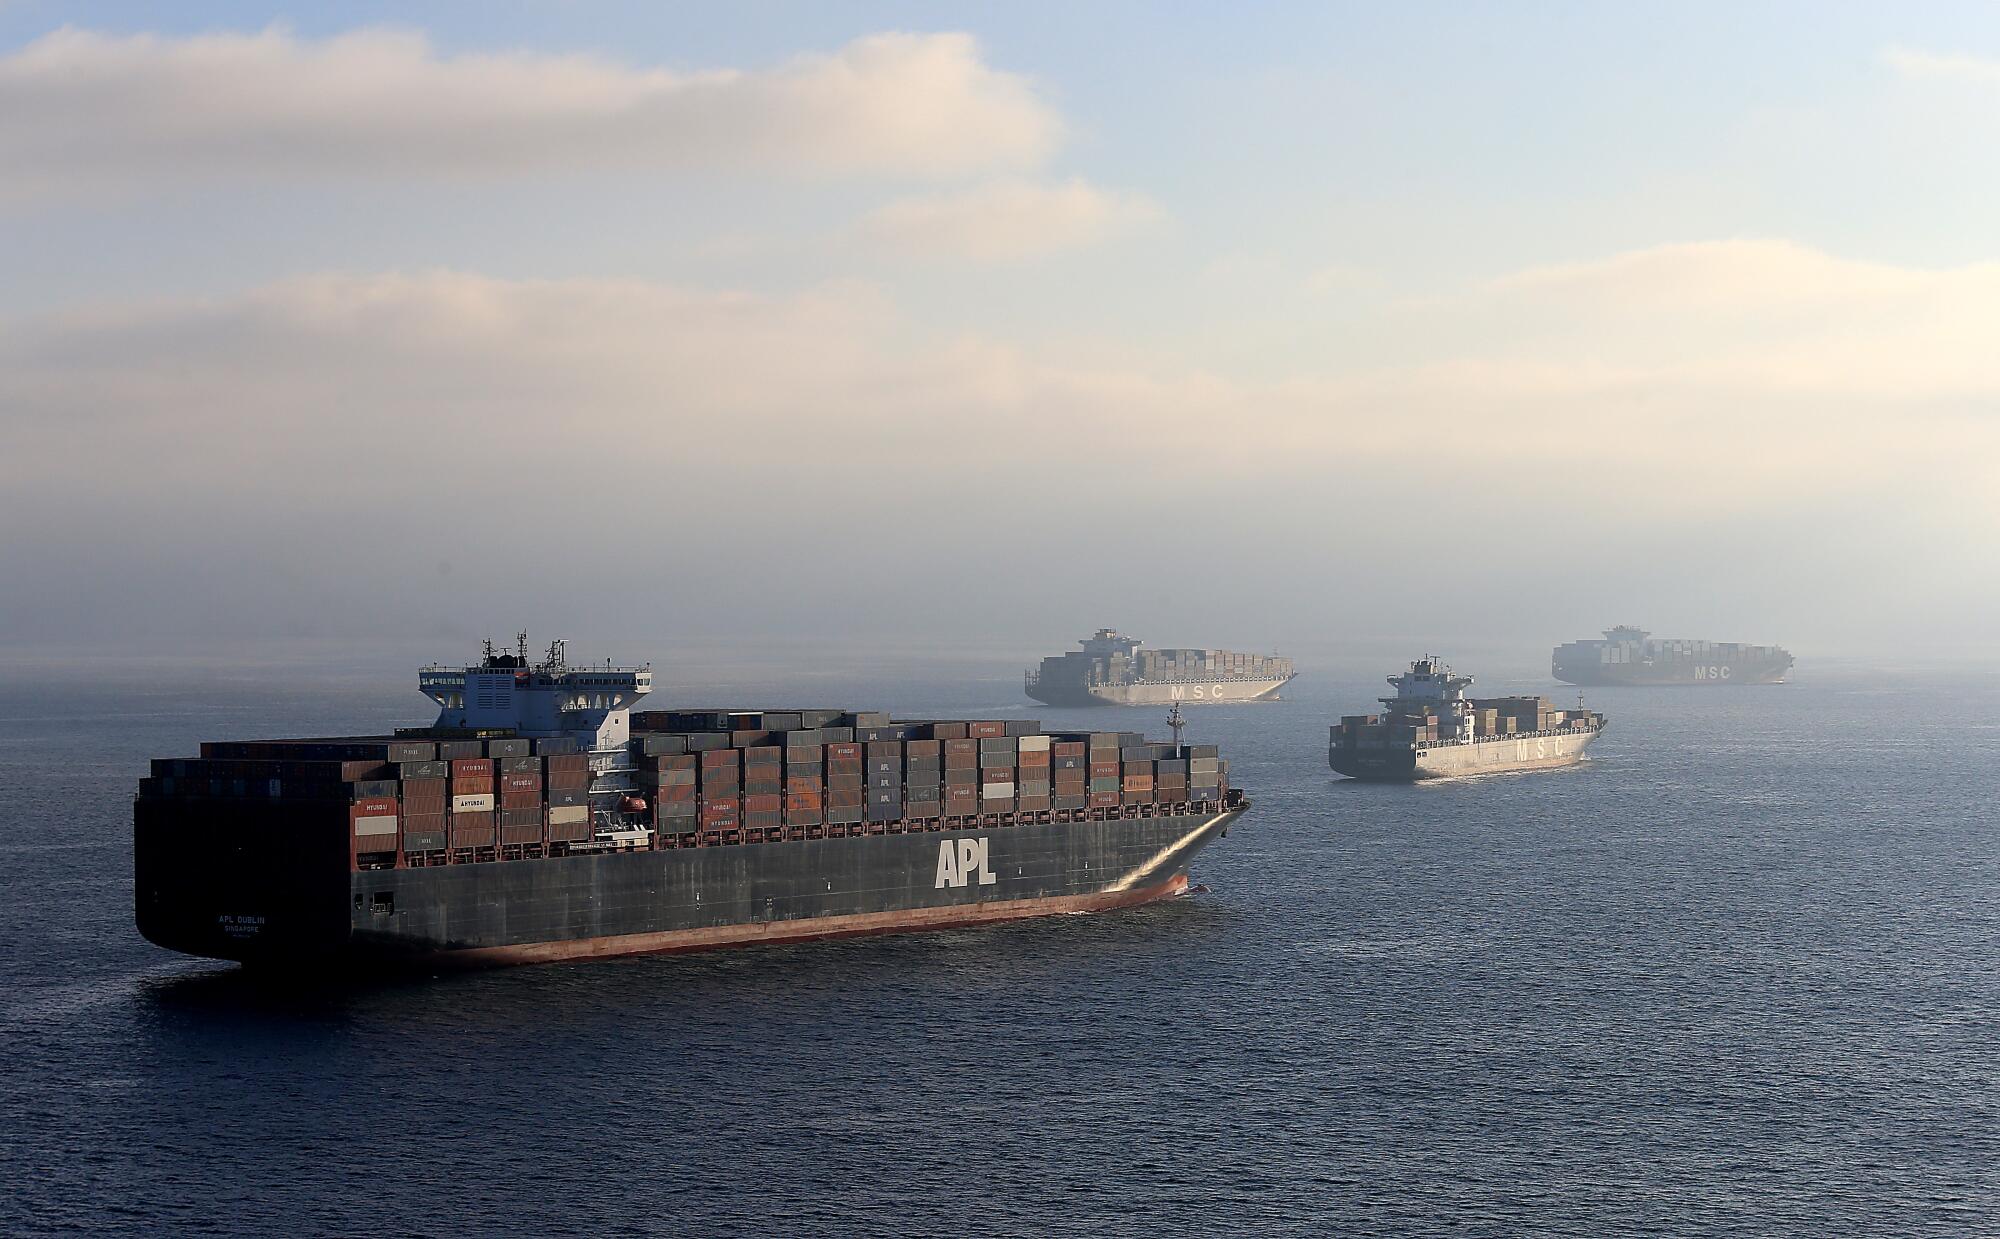 Cargo ships anchor off the ports of Los Angeles and Long Beach.